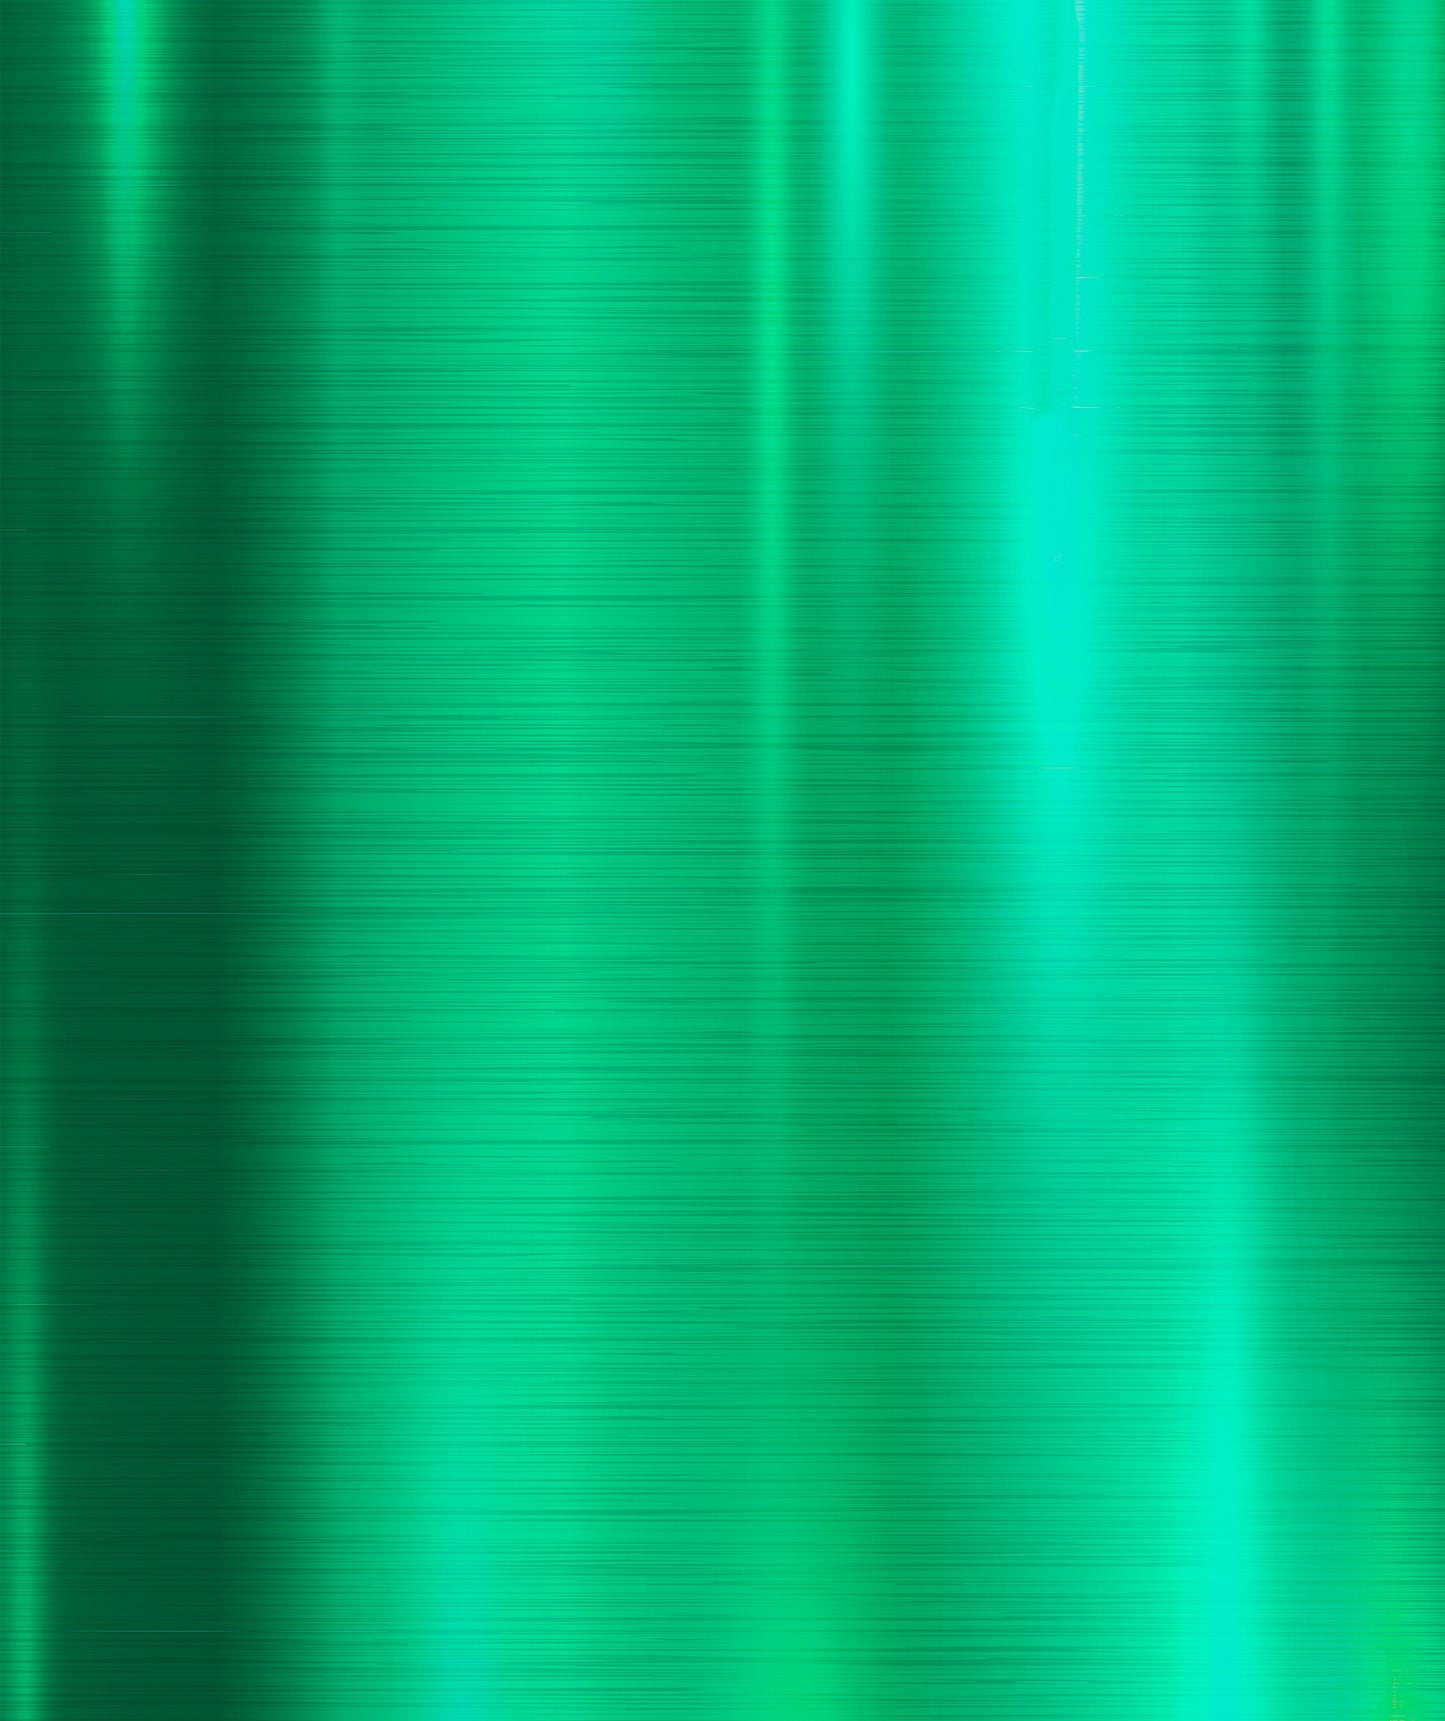 Glossy Metallic Wrapping Paper Roll Teal Green Ream Wholesale Wrapaholic